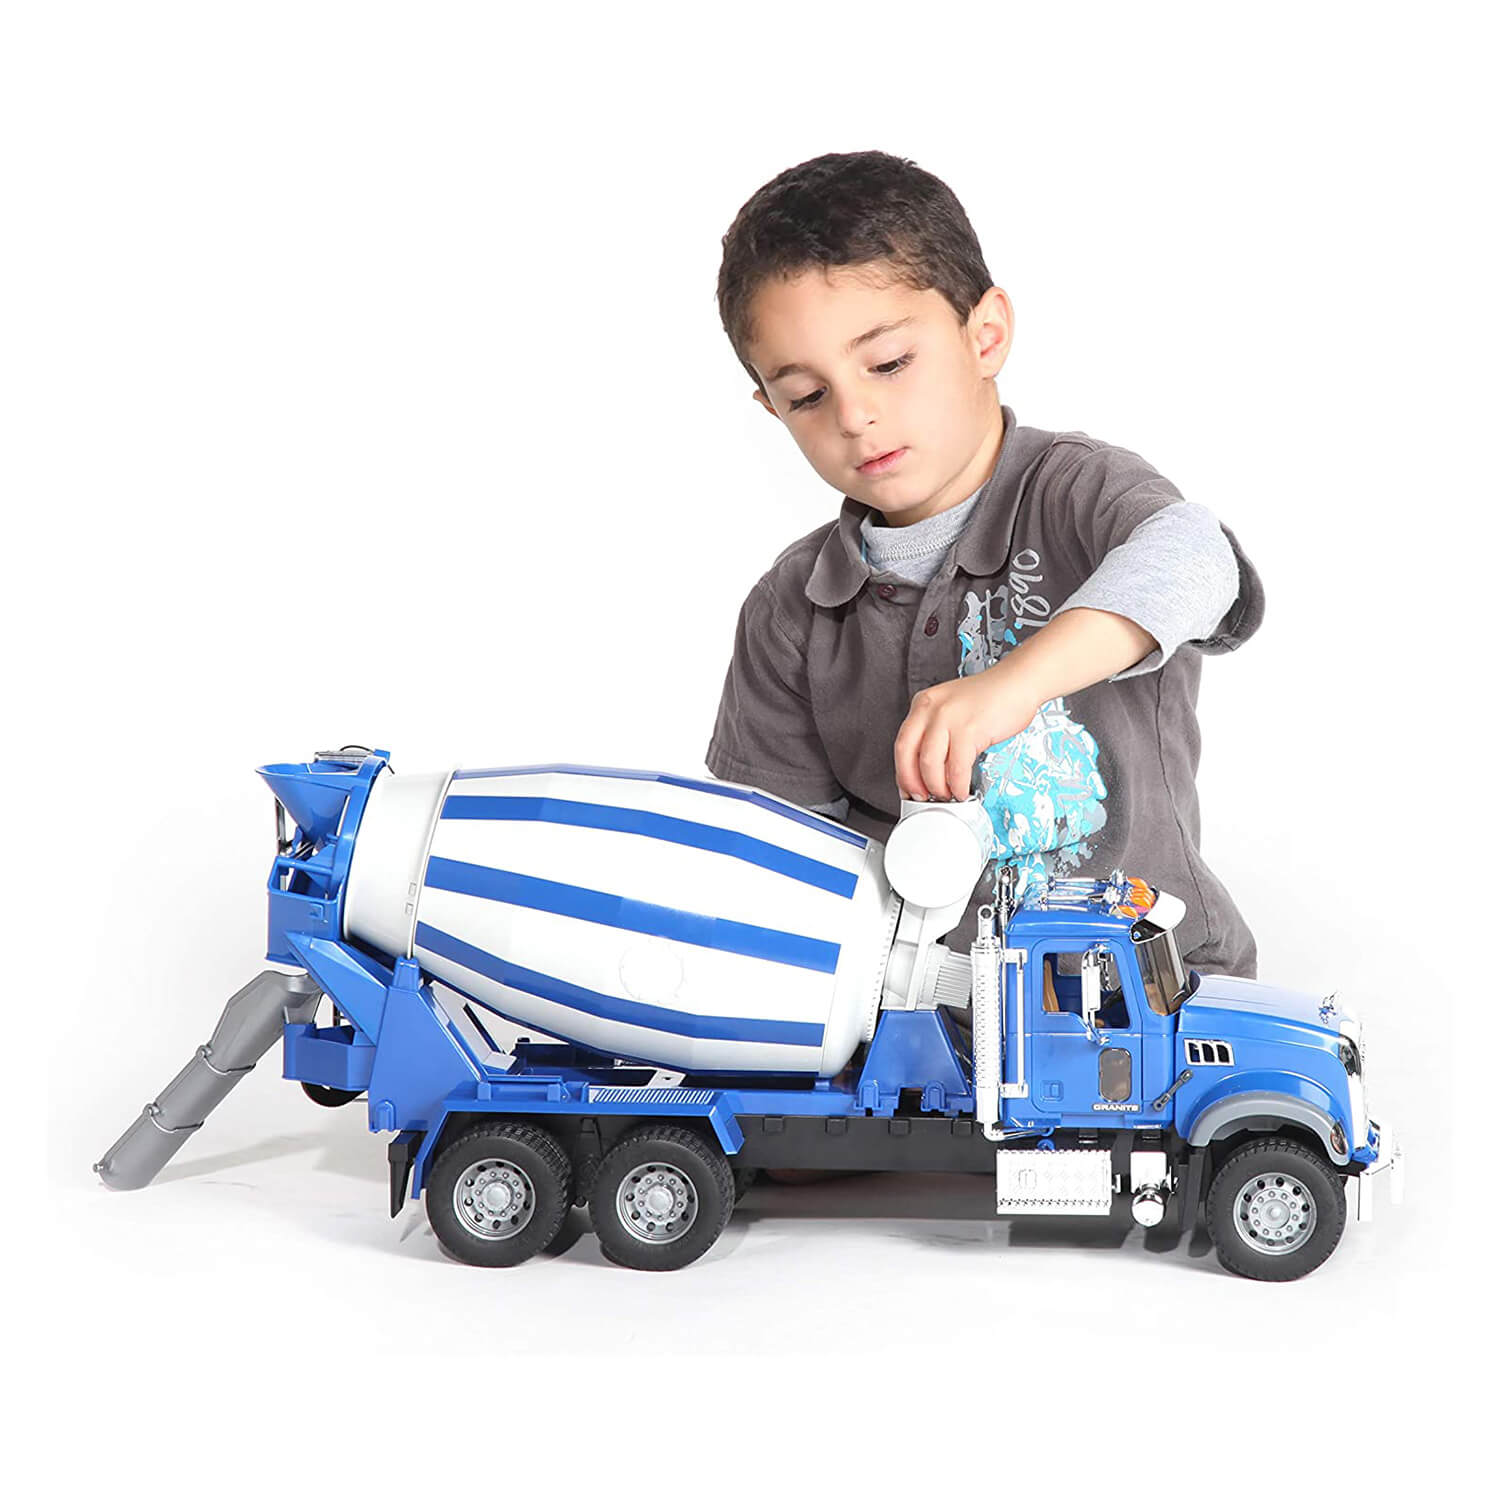 Boy playing with the cement mixer truck toy.